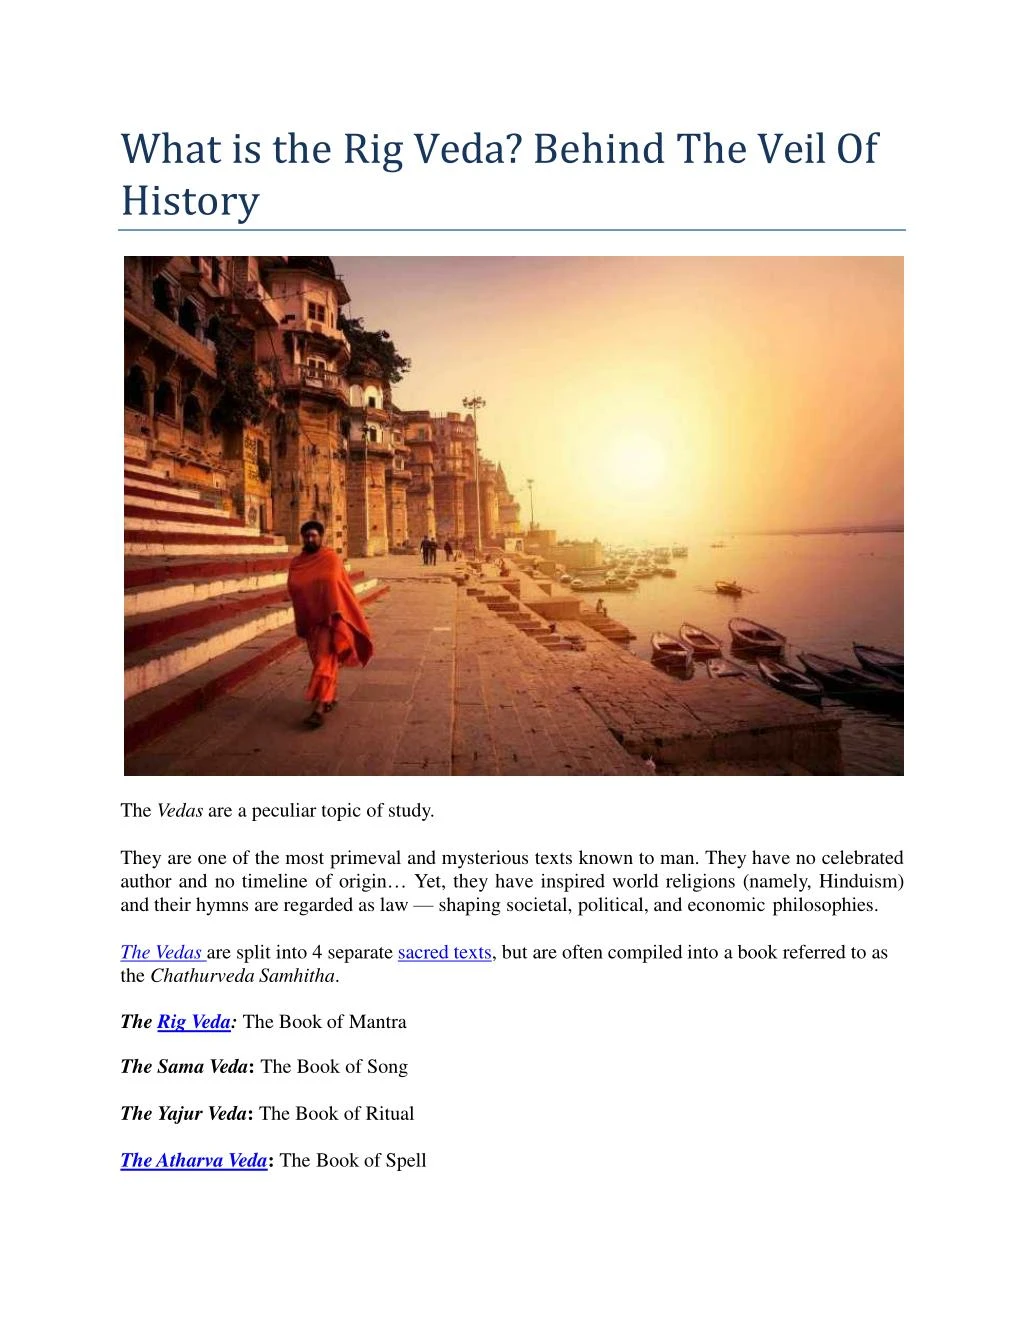 what is the rig veda behind the veil of history